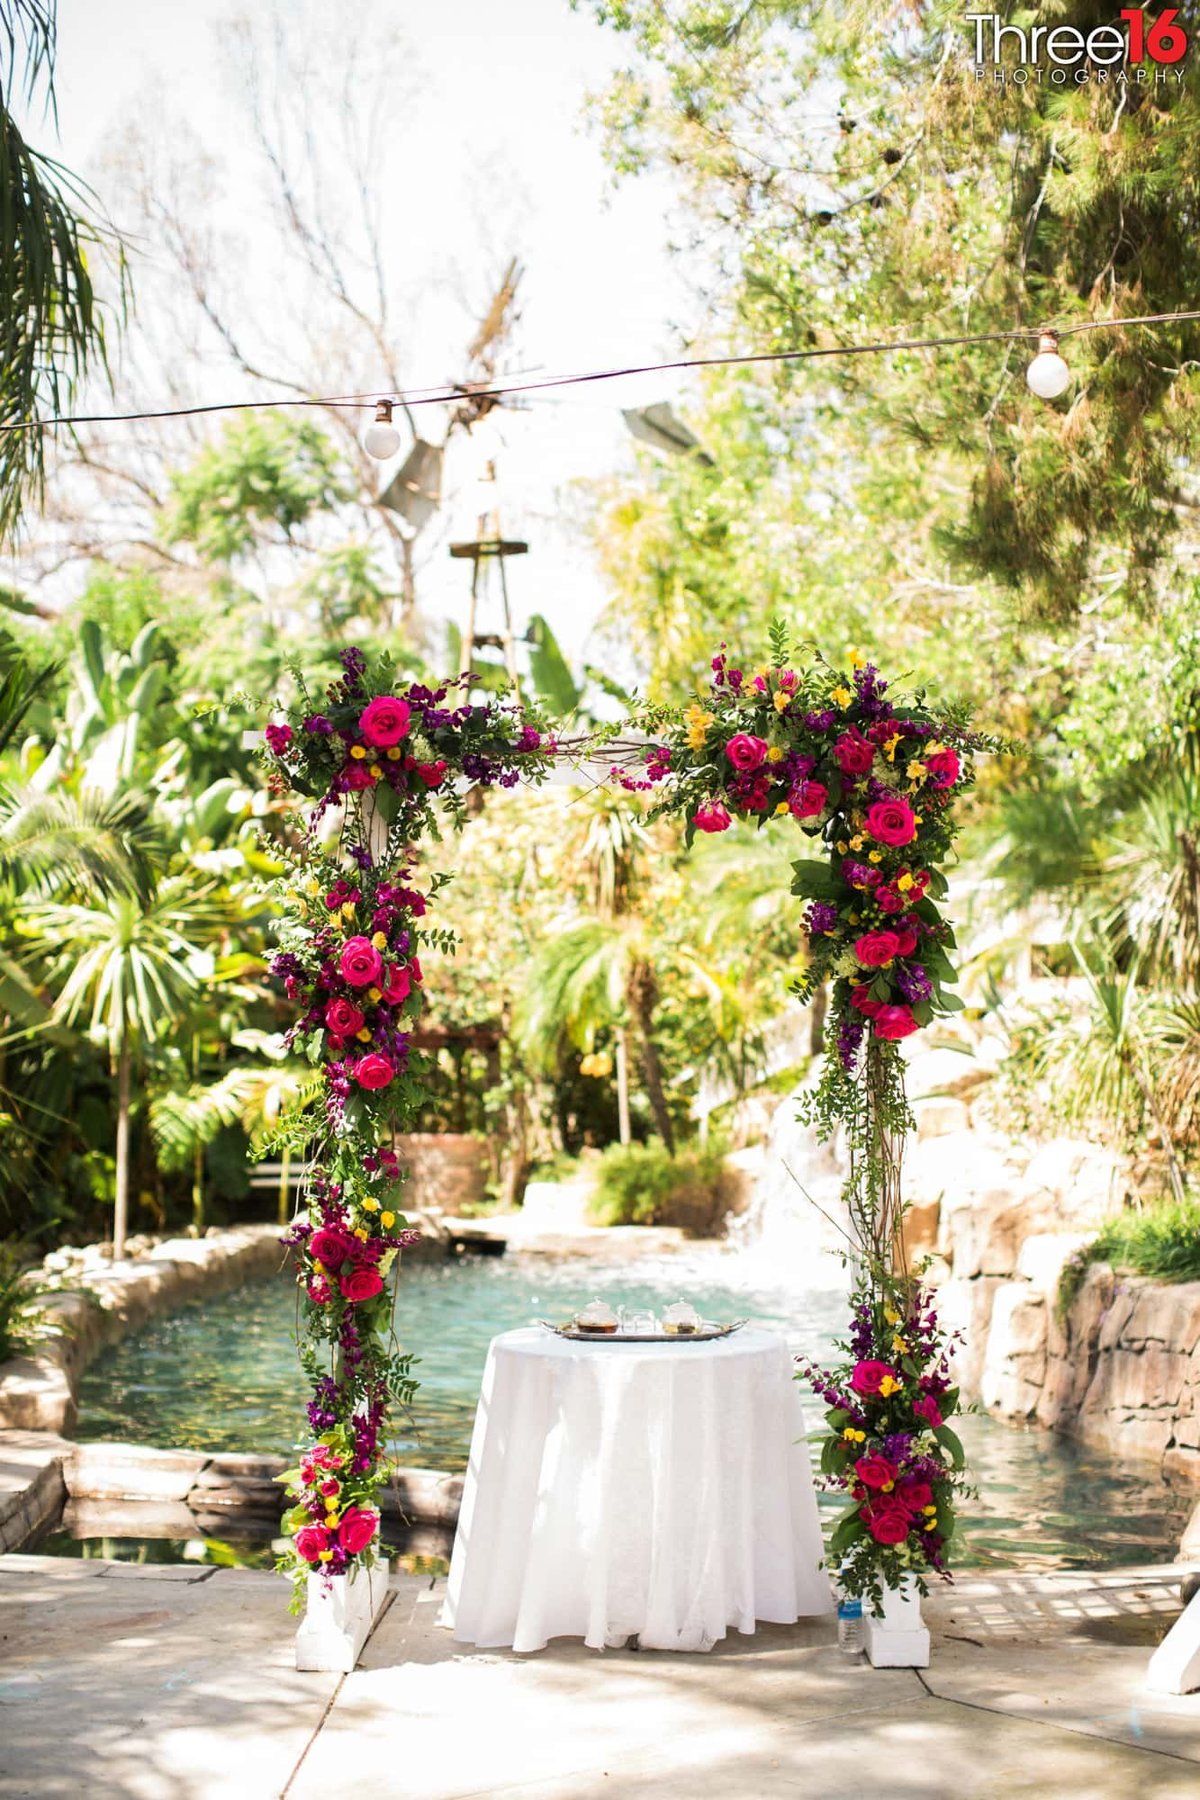 Floral archway over the sweetheart table at wedding reception